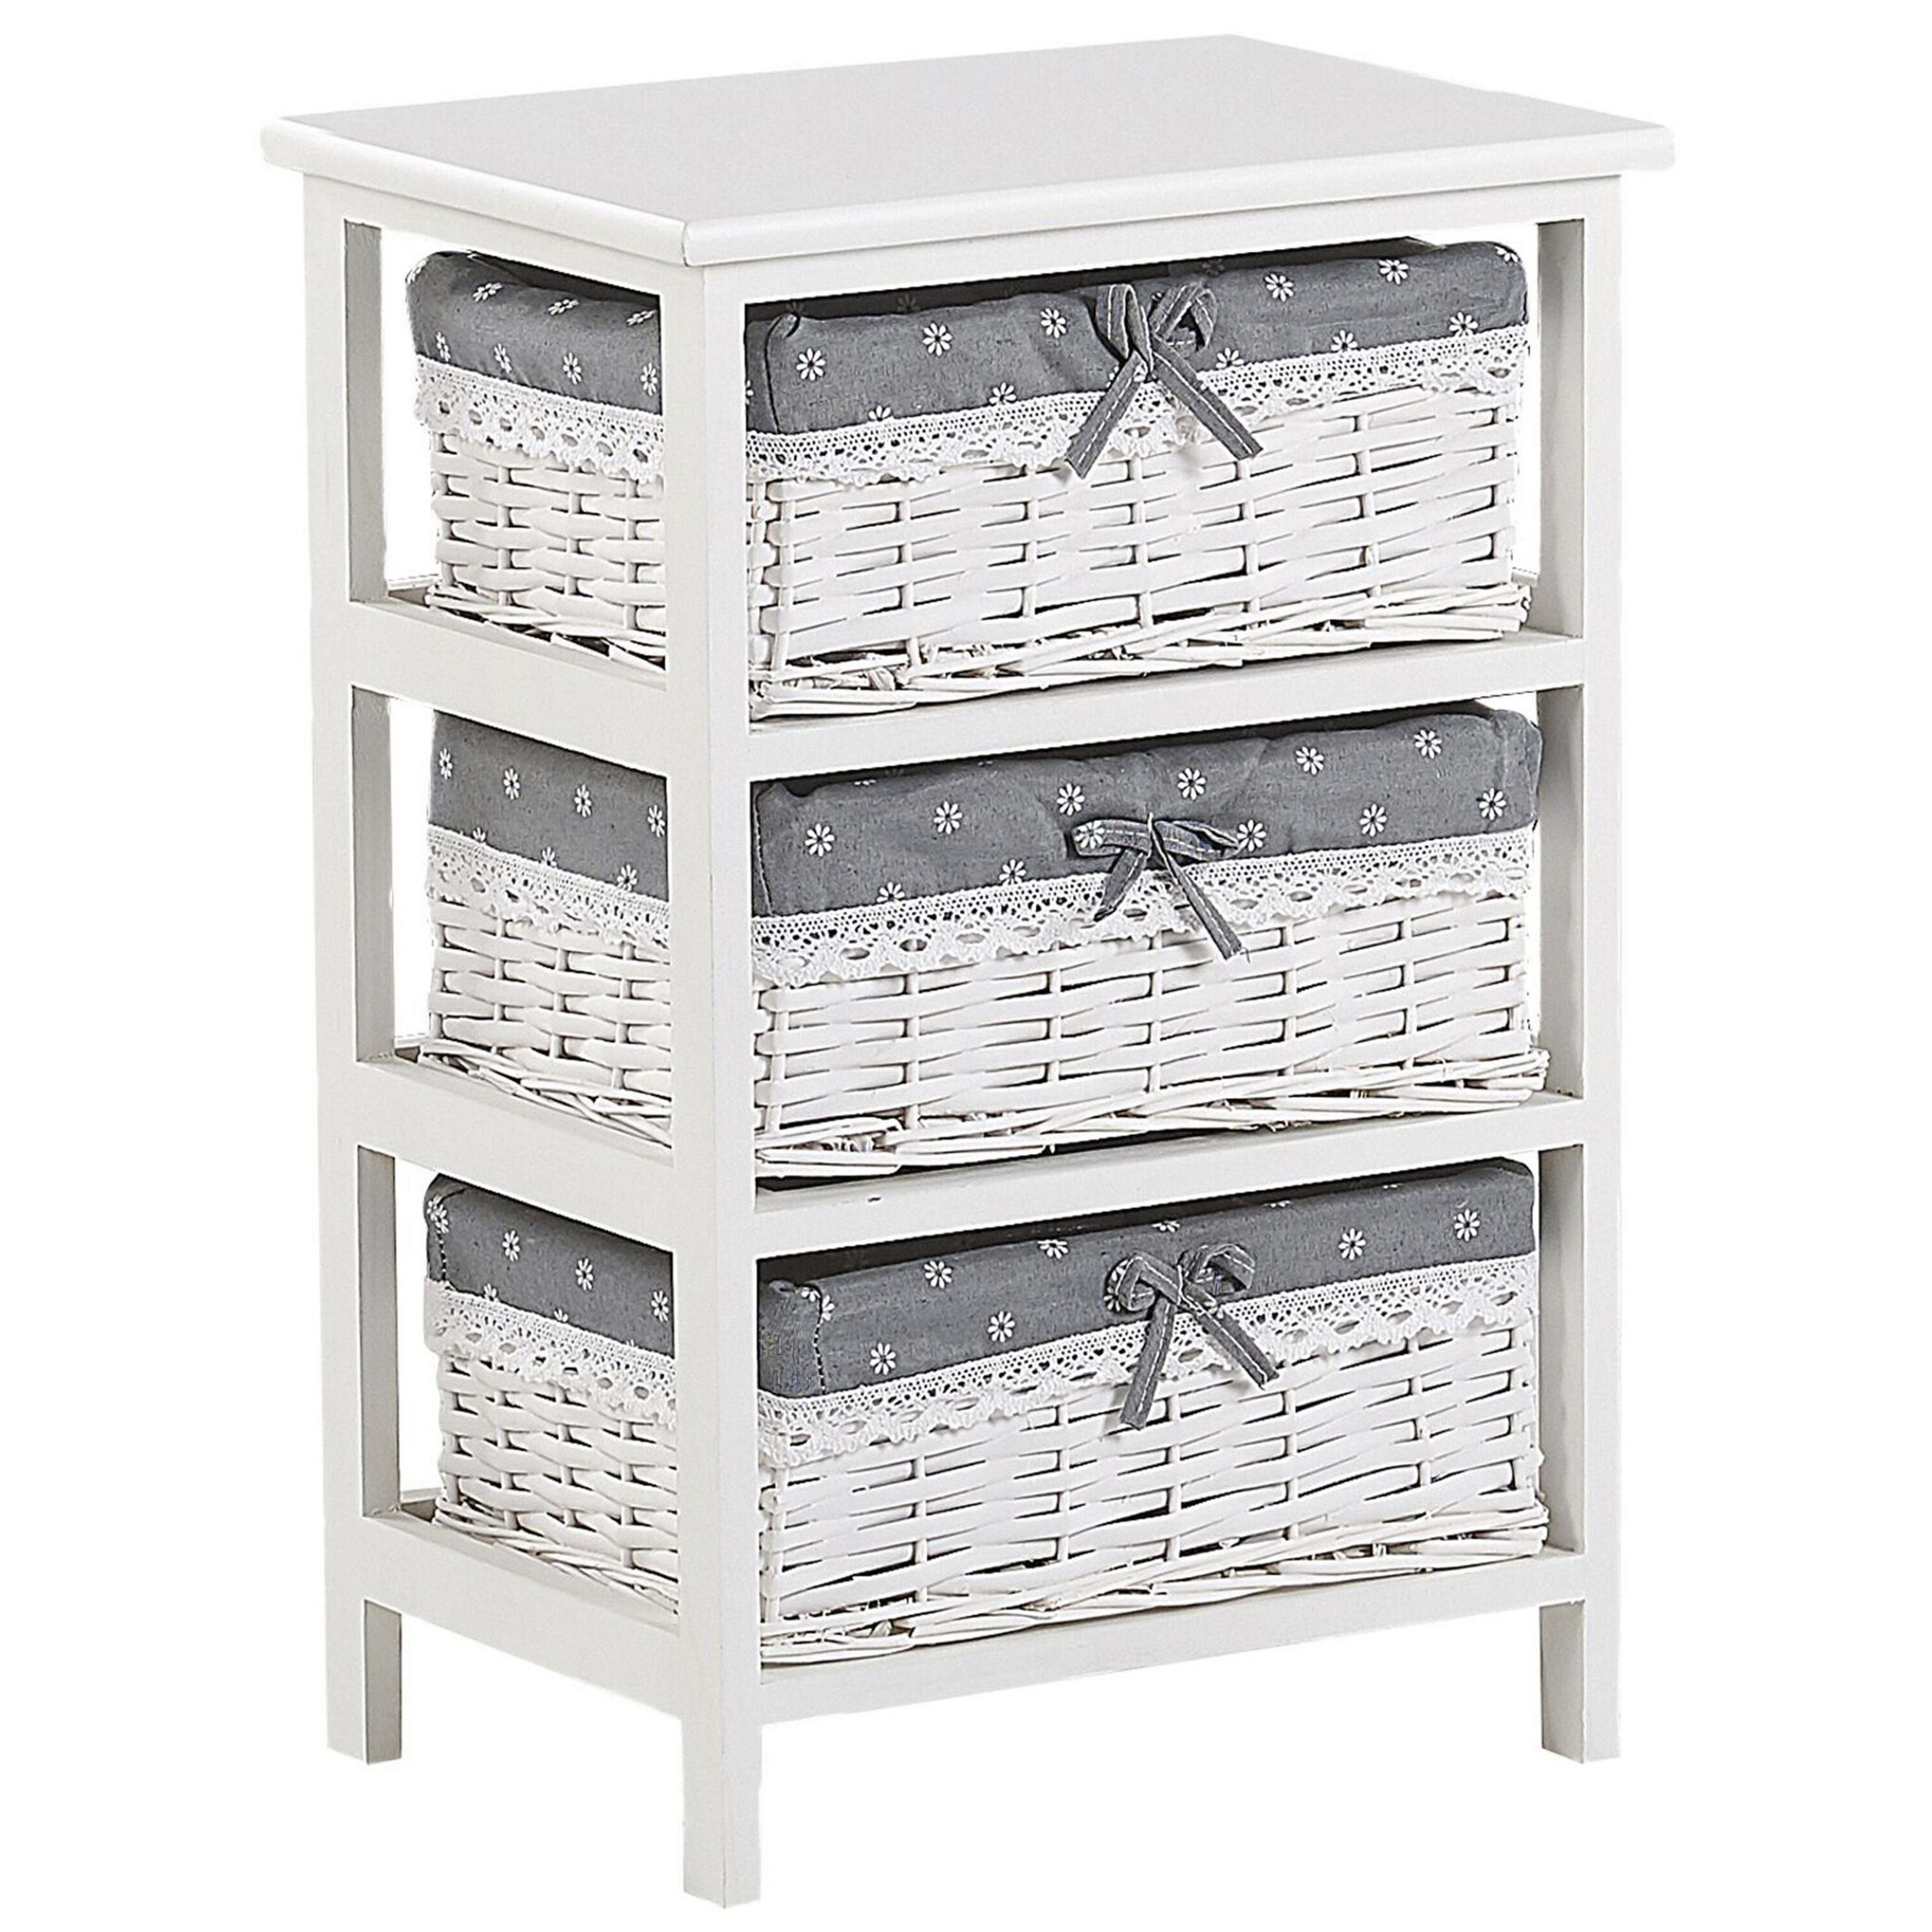 Beliani Storage Unit White Wood MDF 58 x 40 cm 3 Wicker Baskets with Grey Fabric Lining Bedside Table Children's Room Furniture